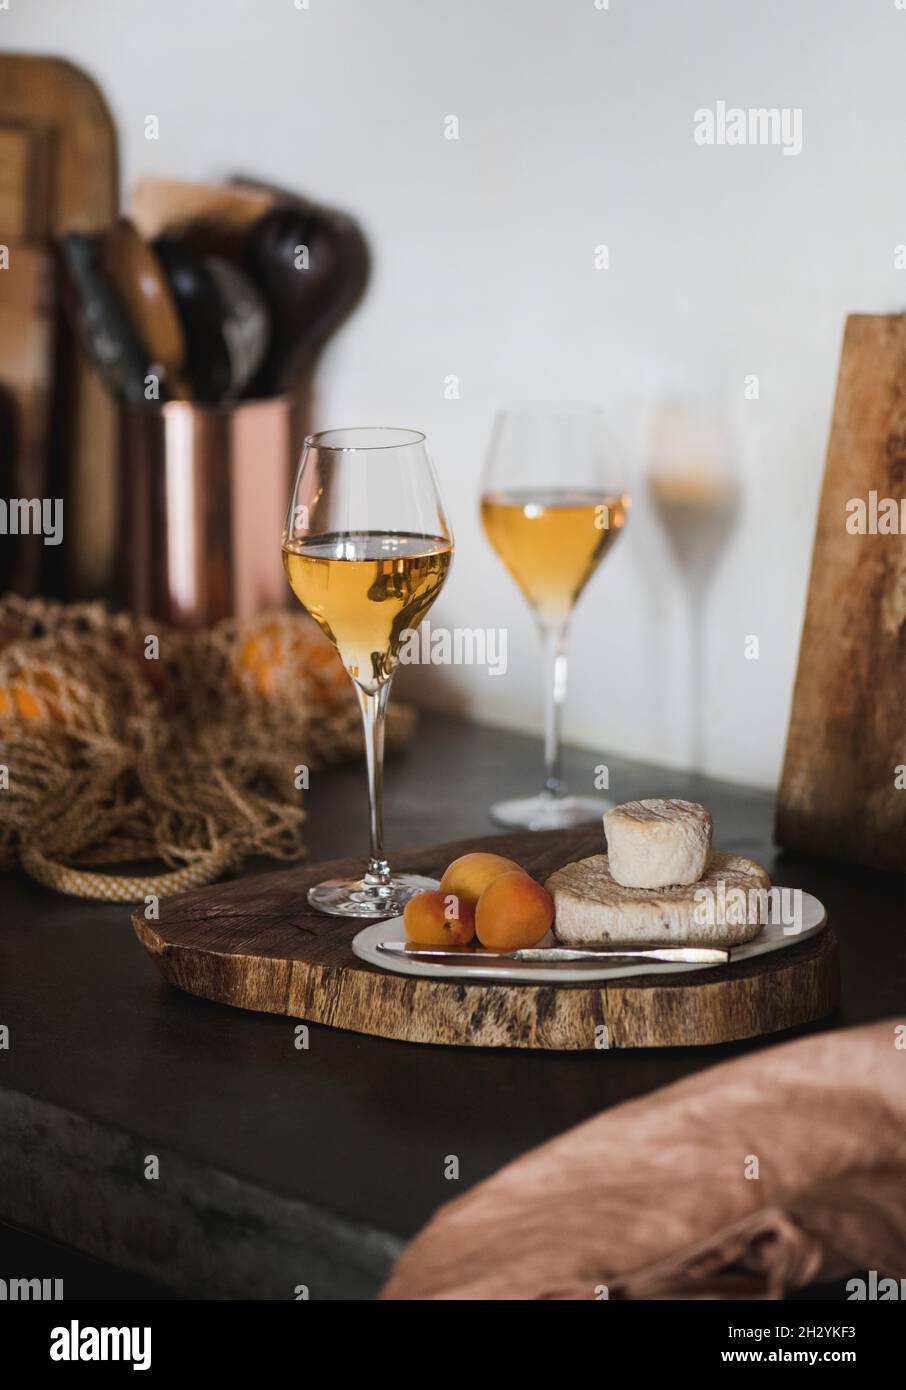 Orange or Amber wine in wineglass and appetizers snacks Stock Photo